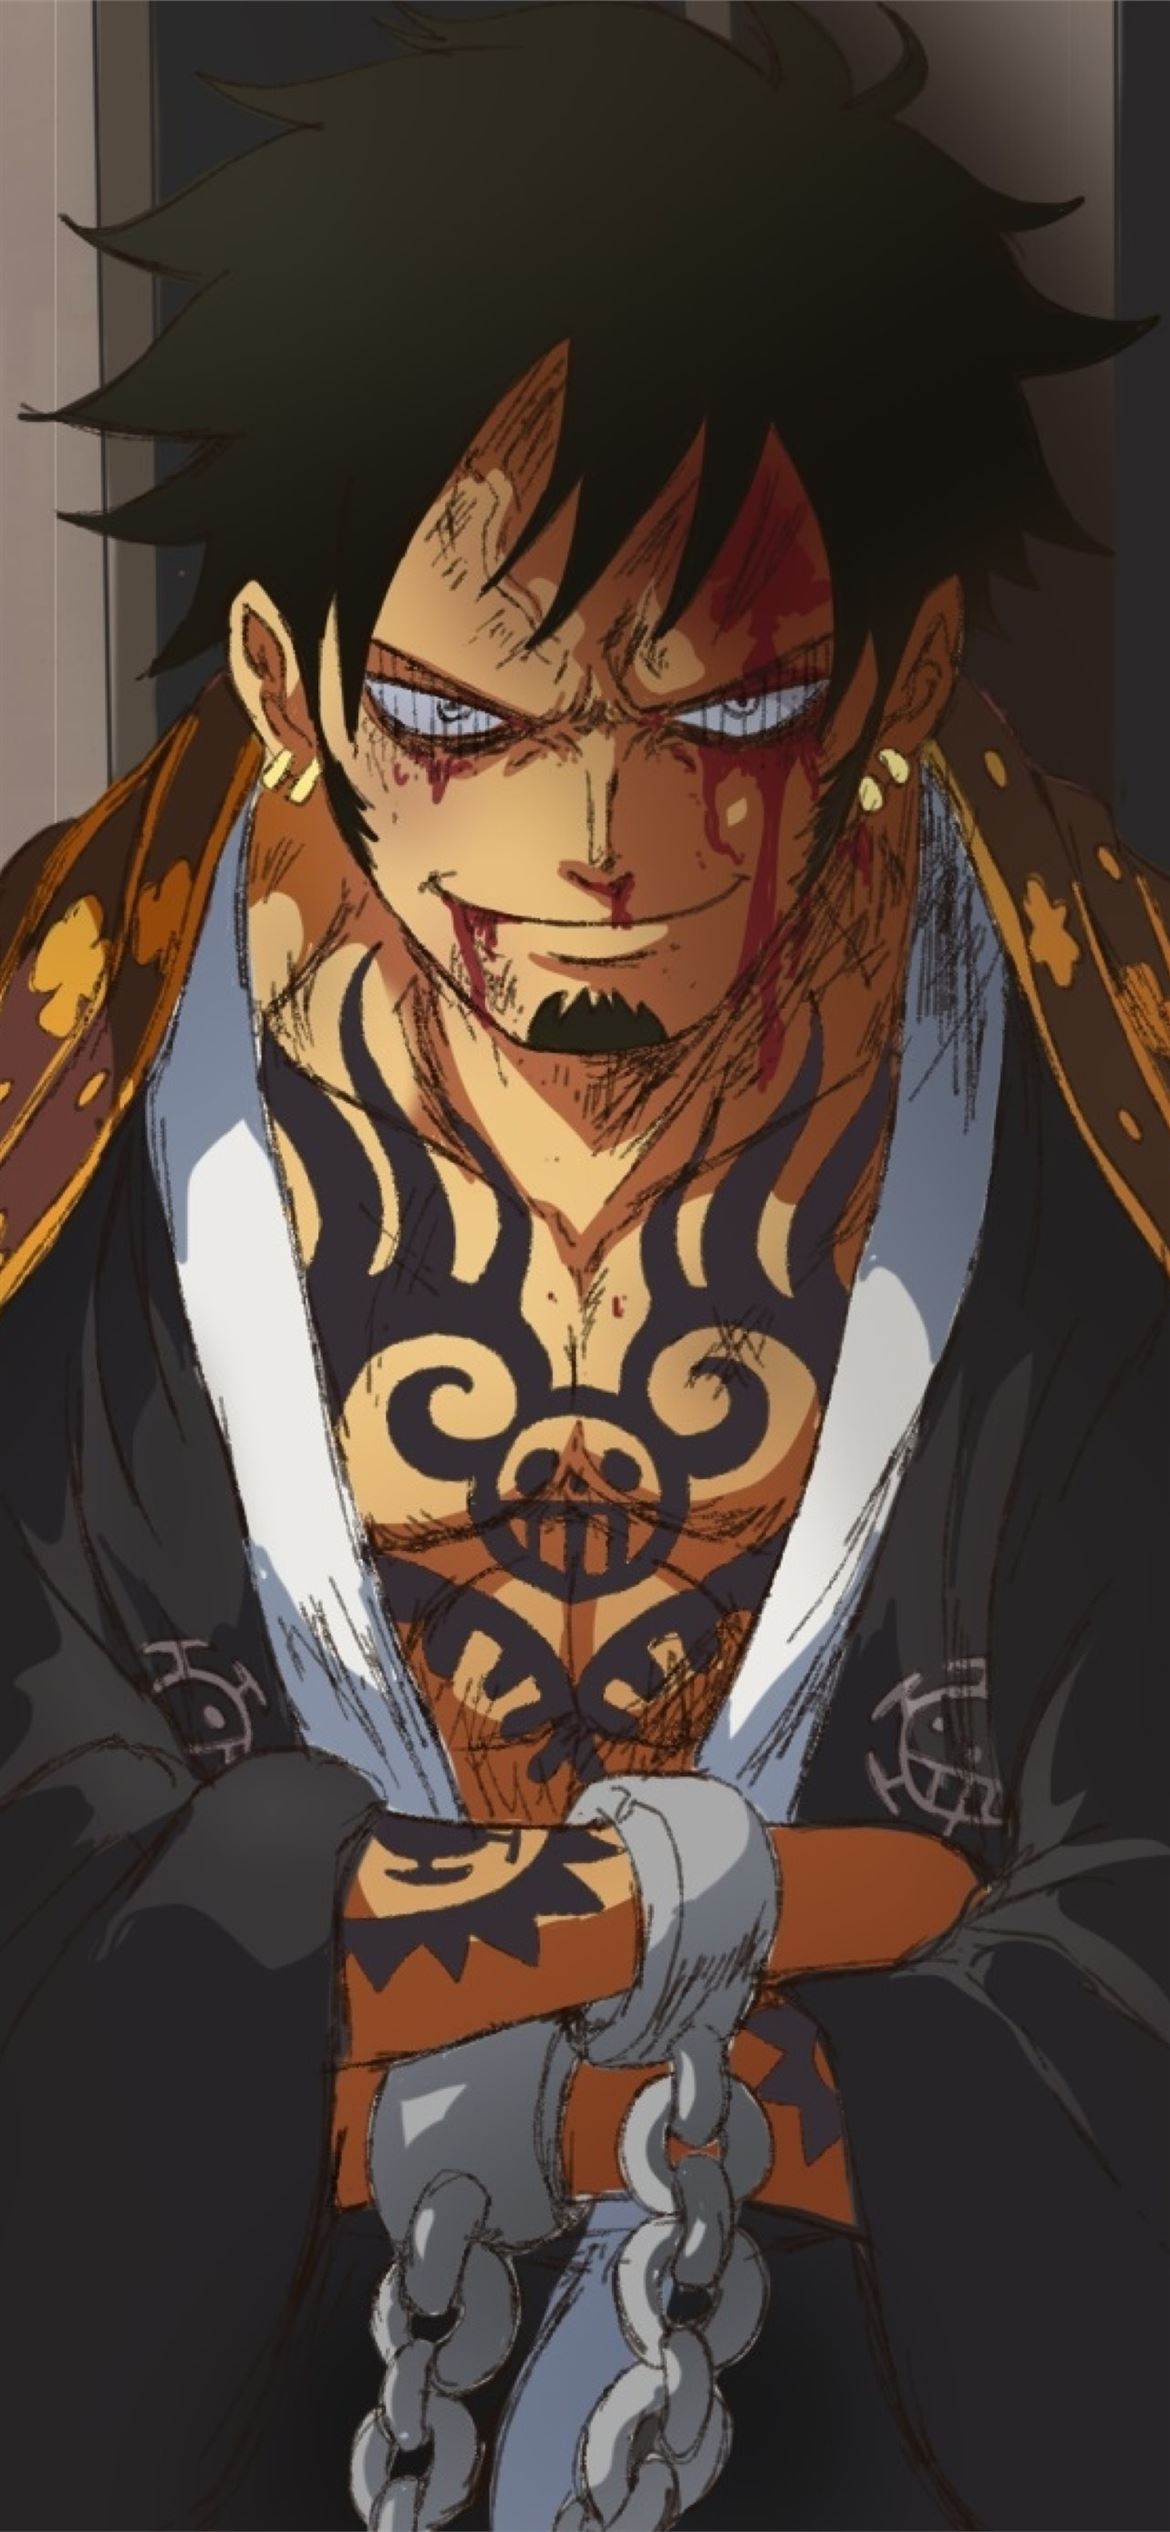 Trafalgar Law In One Piece Resolution HD Anime 4K ... iPhone Wallpapers  Free Download